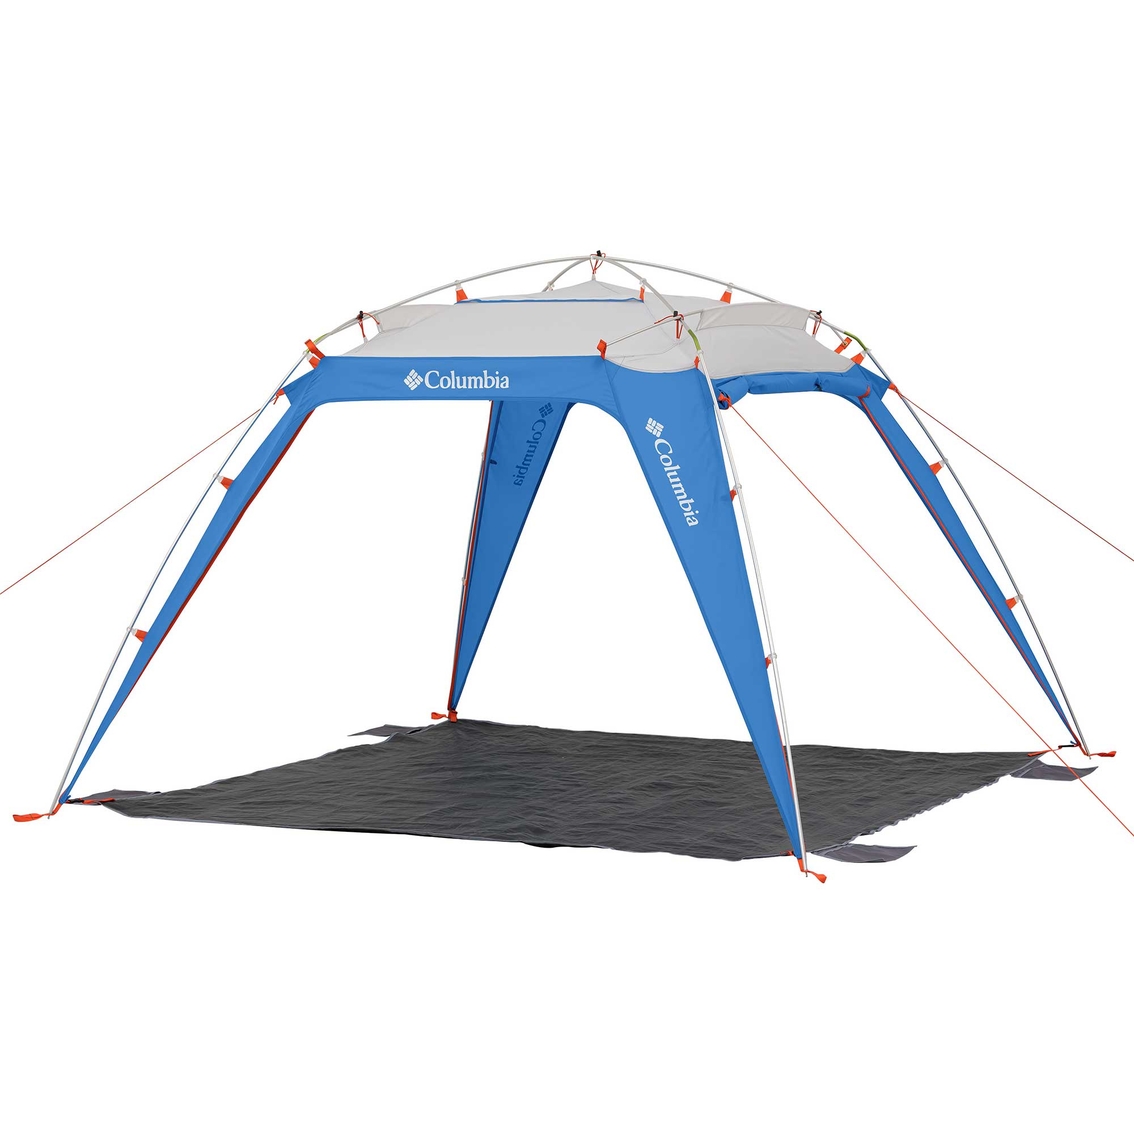 Columbia 8 x 8 ft. Sport Shade - Image 3 of 10